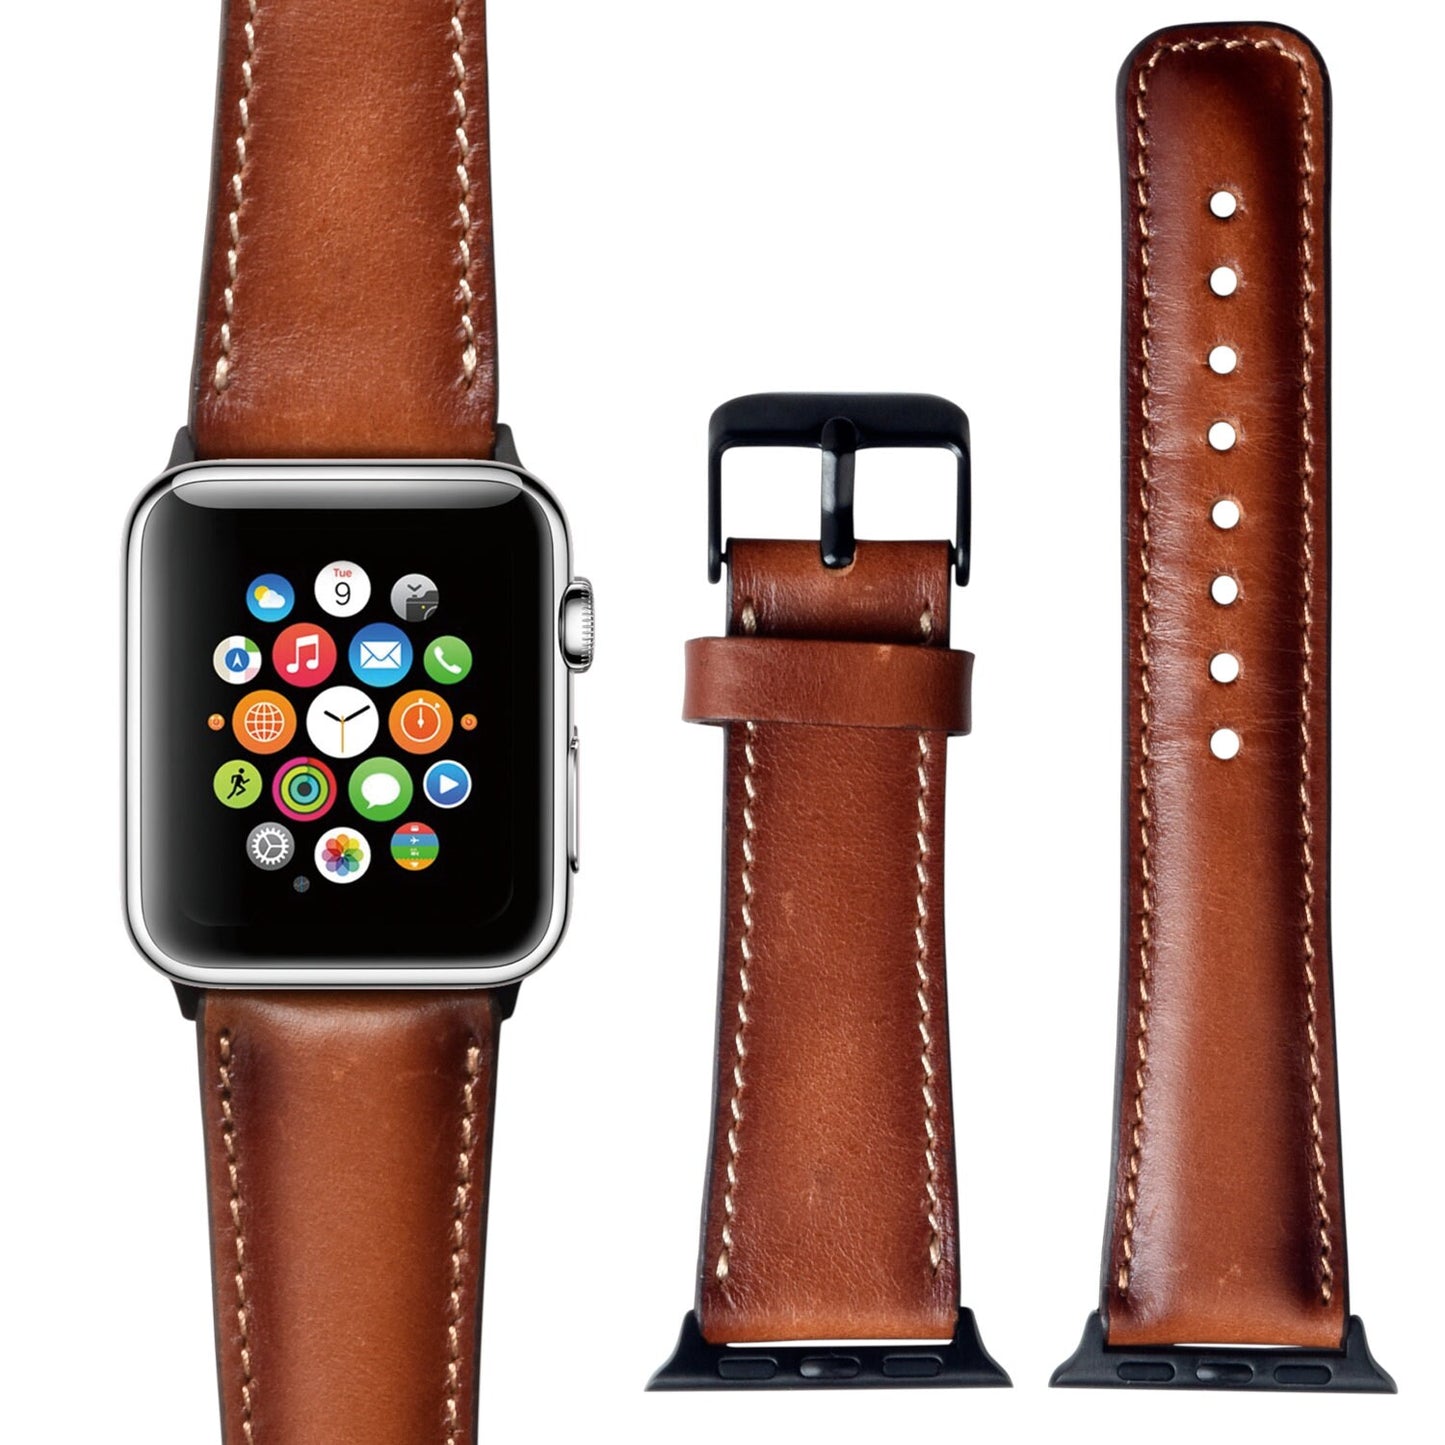 Apple Watch Band Brown Full Grain Leather for Apple Watch Series 1-2-3-4-5-6-7 & SE | Free Personalization Laser Engraving